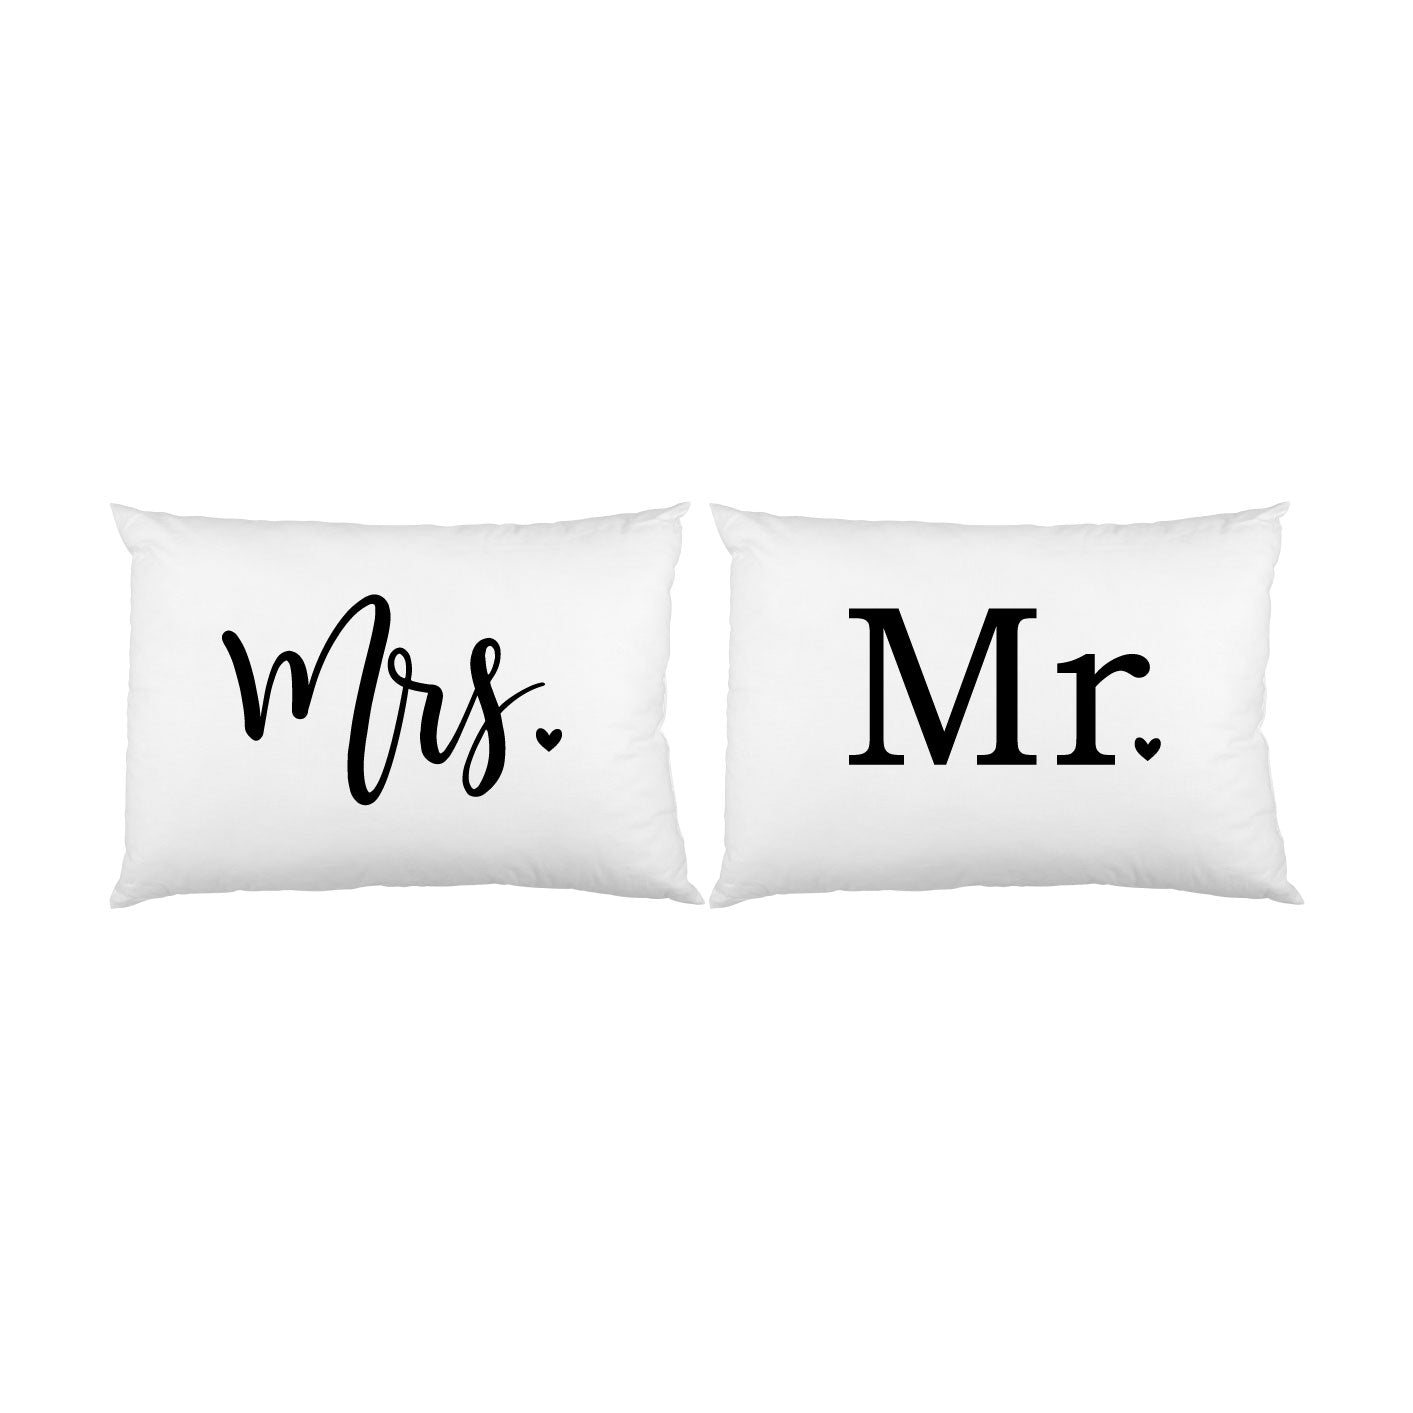 Wifey and Hubby with Hearts Pillowcase - Set of 2